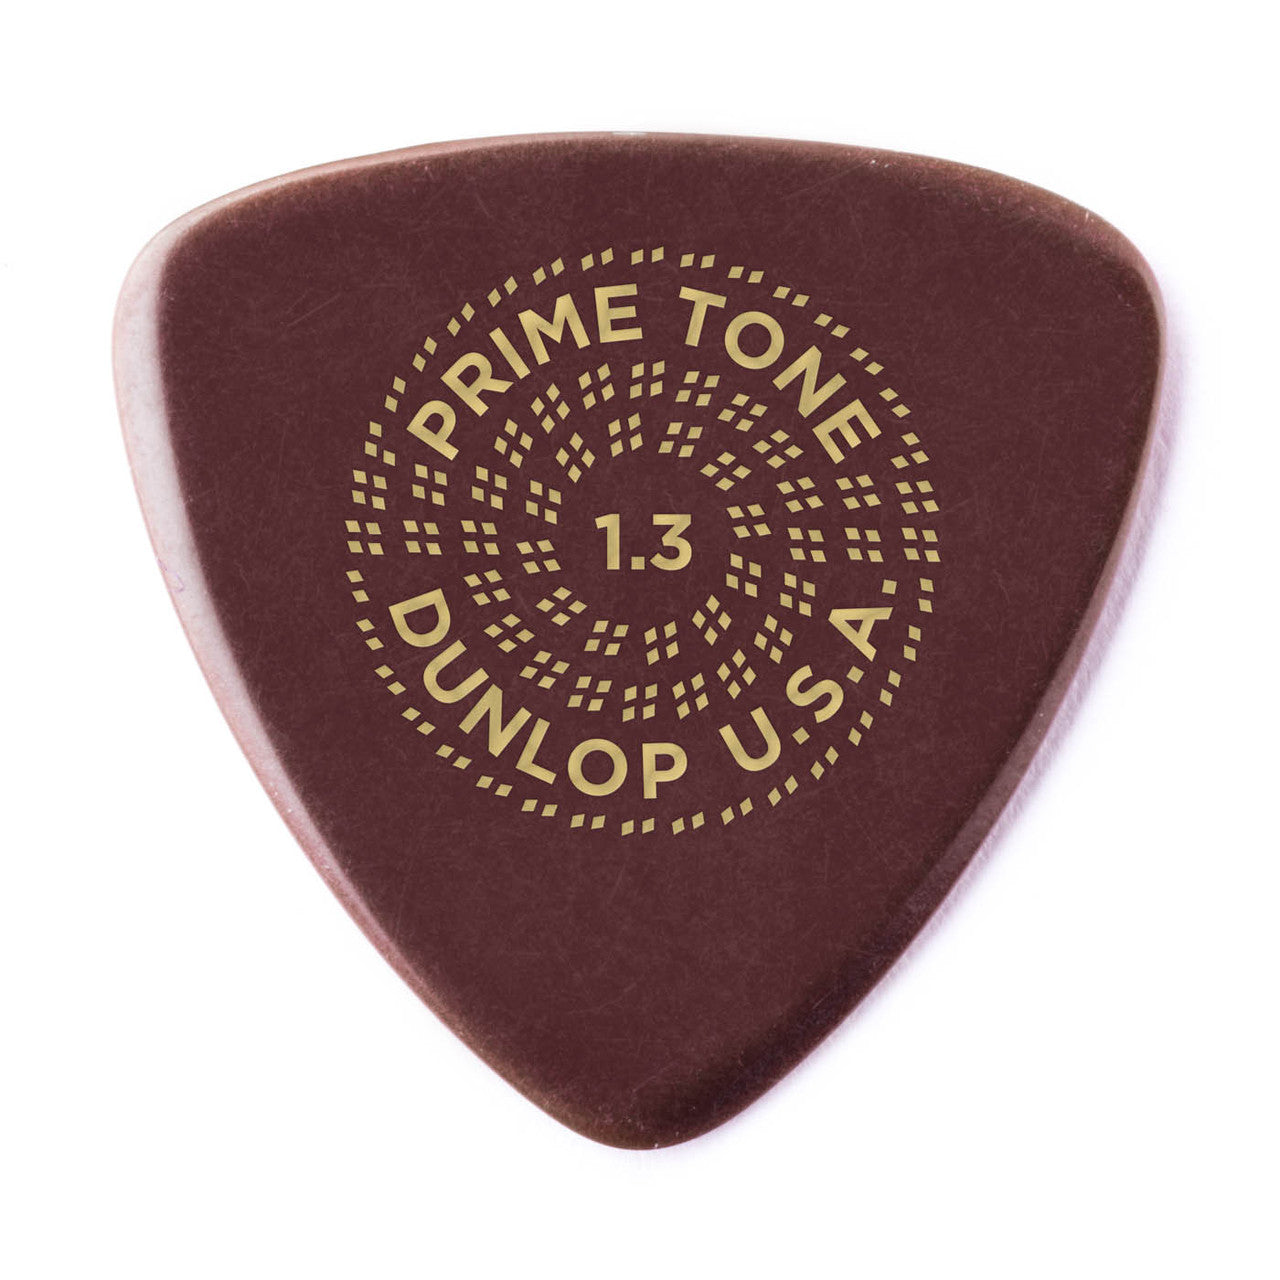 Dunlop Primetone® Small Triangle Smooth Pick 1.3mm